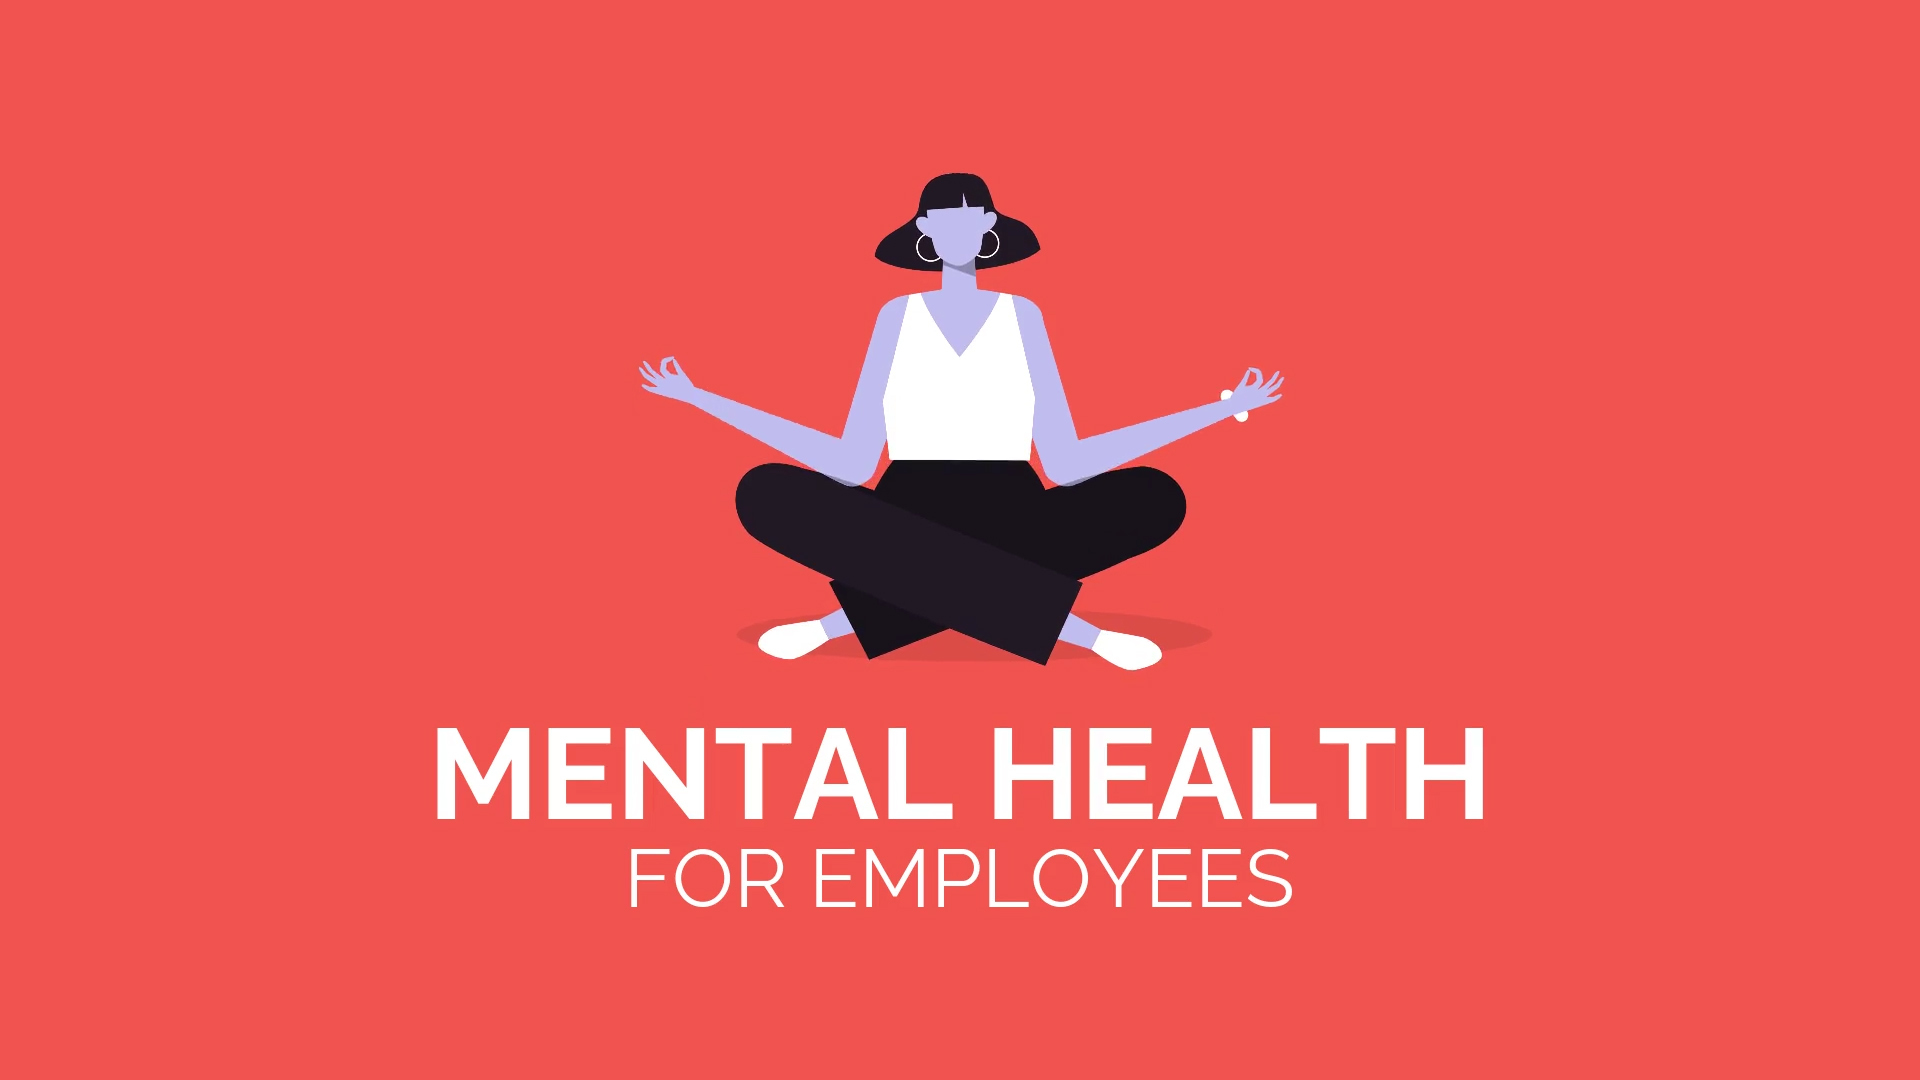 Mental-Health-for-Employees-16x9-1